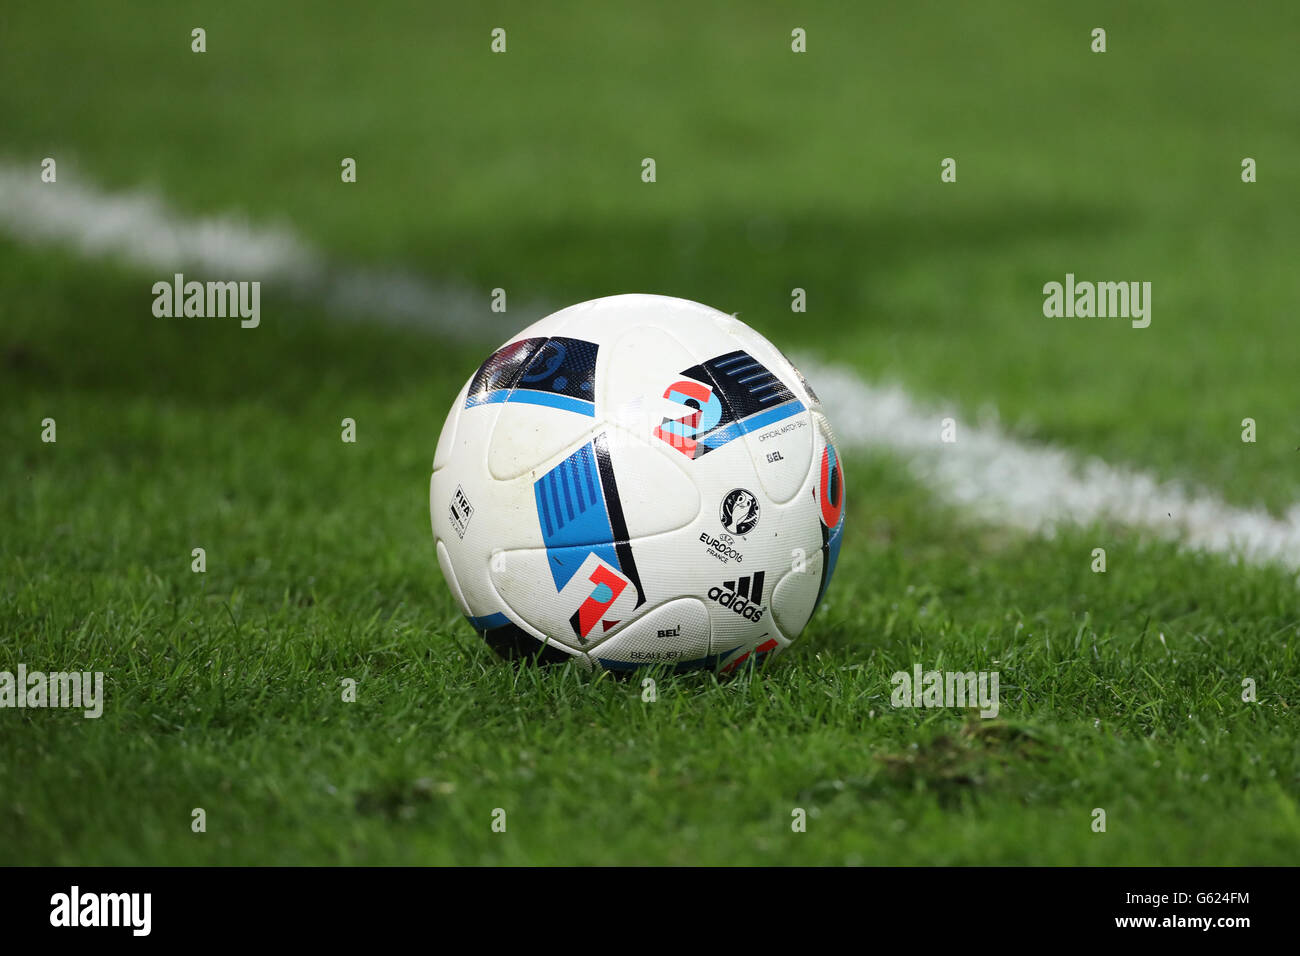 A general view of an Adidas match ball during the Euro 2016, Group E match  at the Stade Pierre Mauroy, Lille. PRESS ASSOCIATION Photo. Picture date:  Wednesday June 22, 2016. See PA